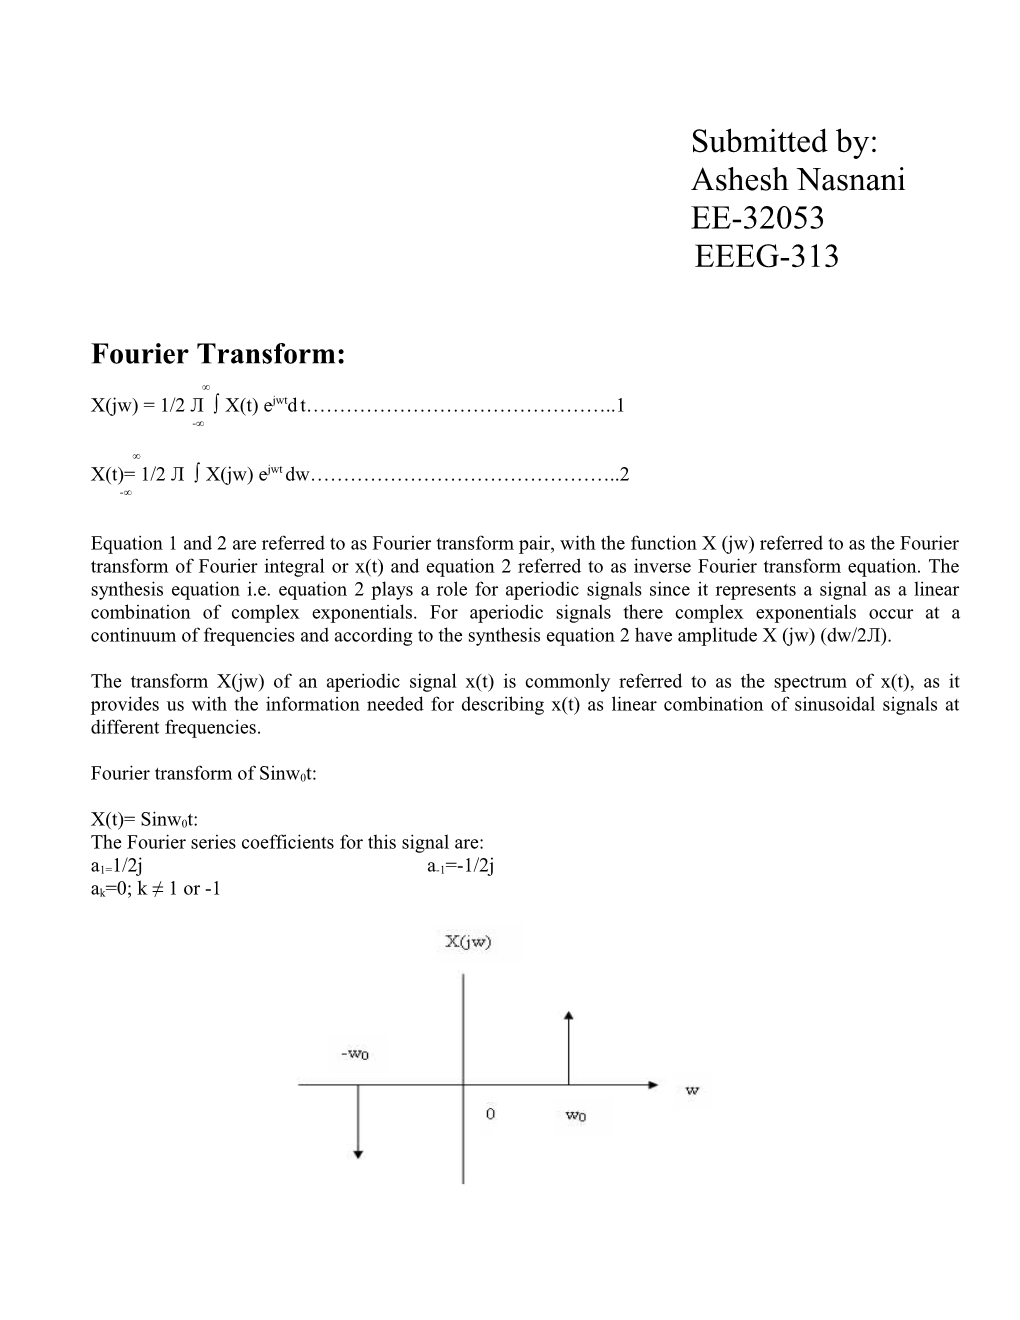 Fourier Transform of Some Important Functions